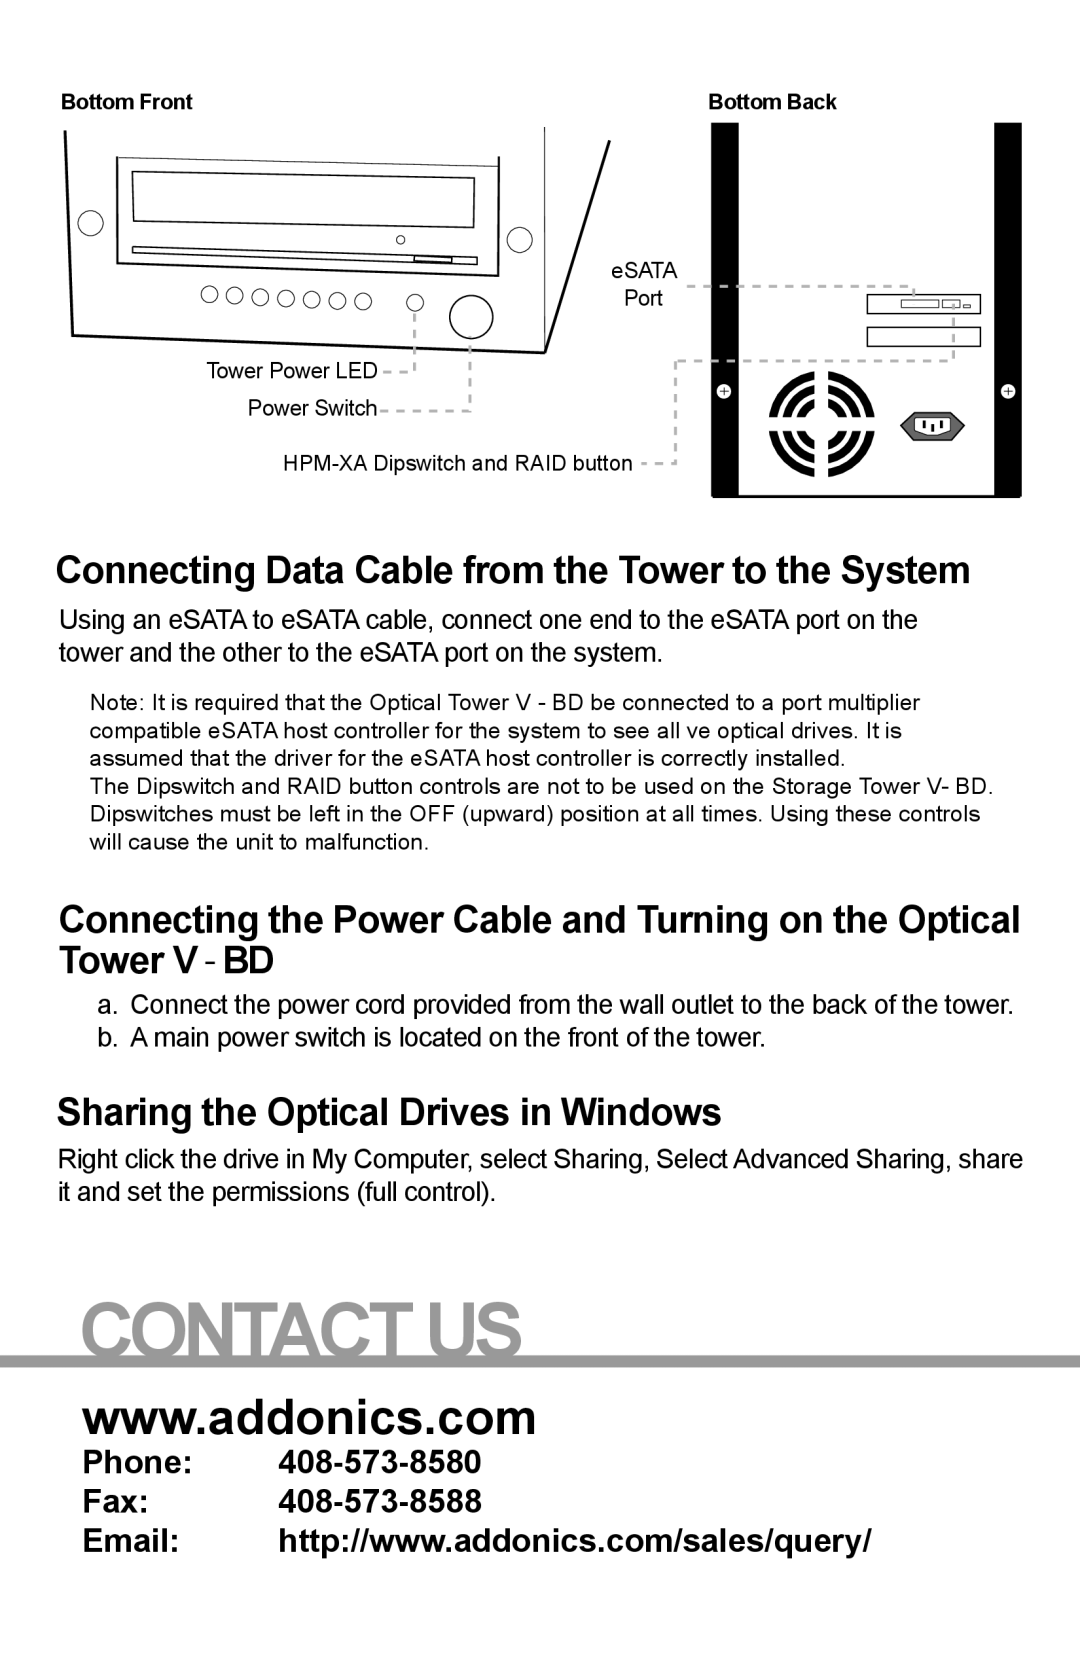 Addonics Technologies ST5BDVES manual Contact Us, Connecting Data Cable from the Tower to the System, Phone Fax 